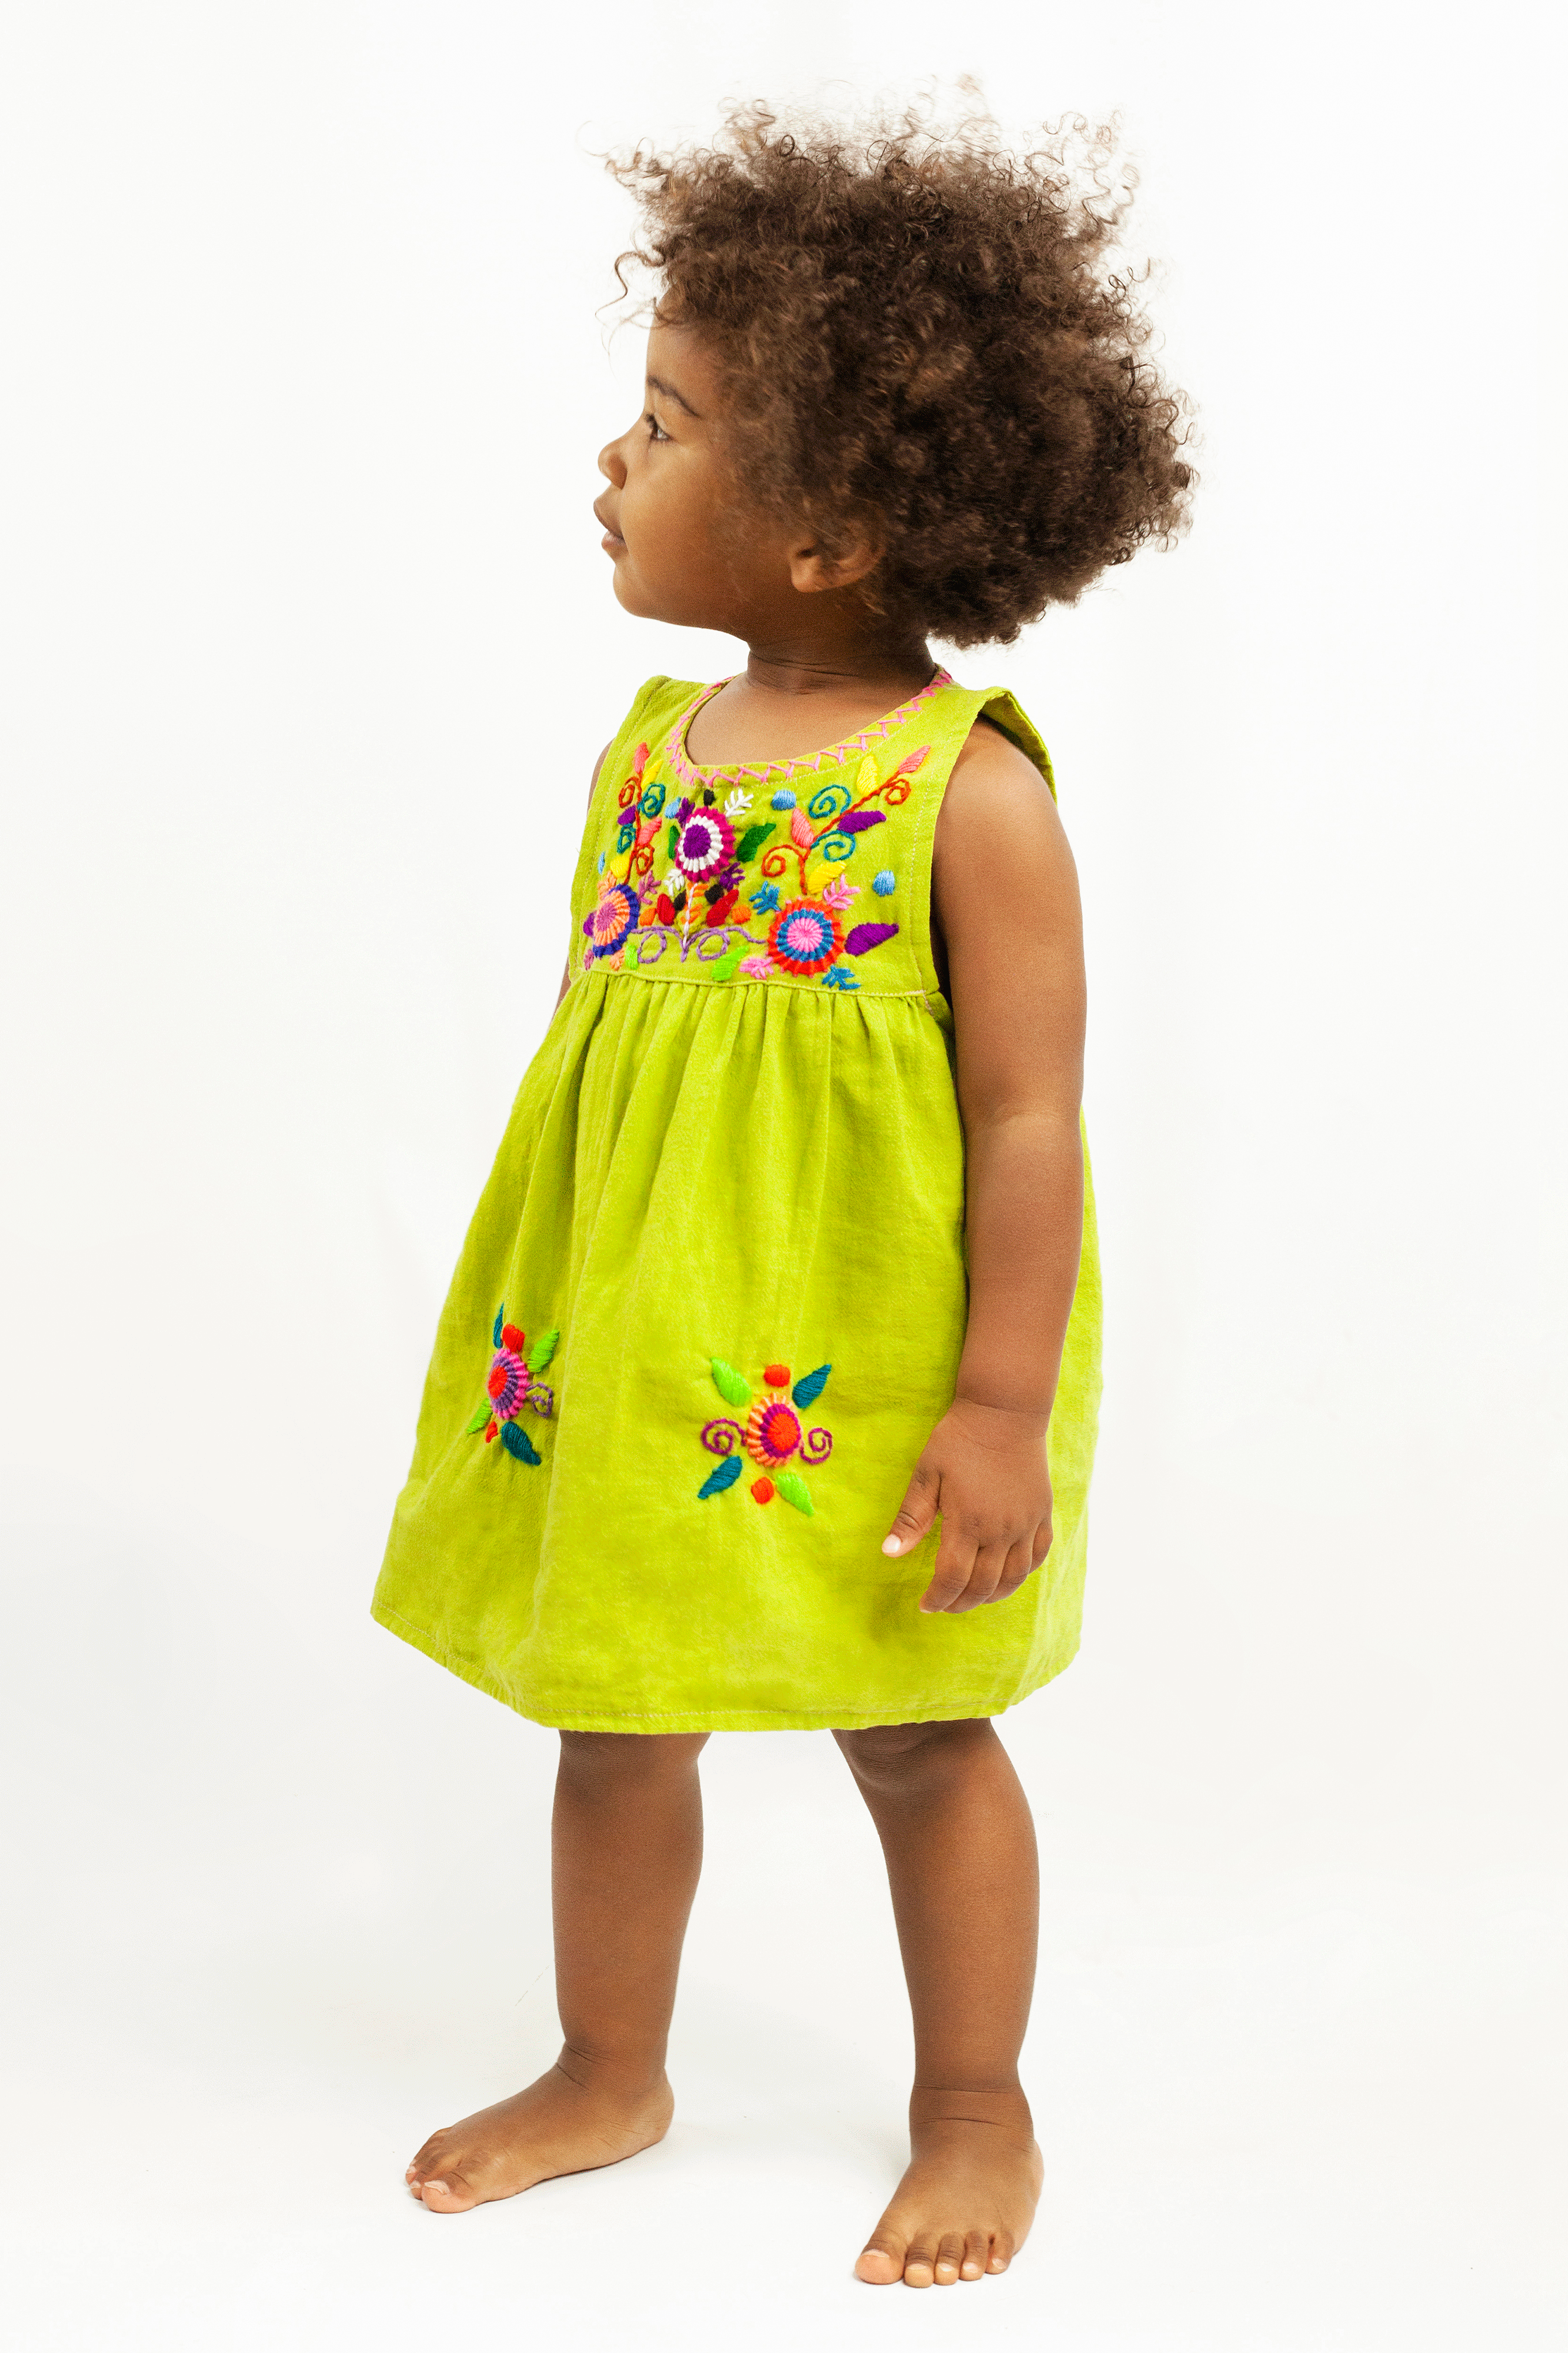 Child wearing a sleeveless light green knee-length sun dress. There are multicolor hand embroidered floral elements on the chest and skirt of the dress. 